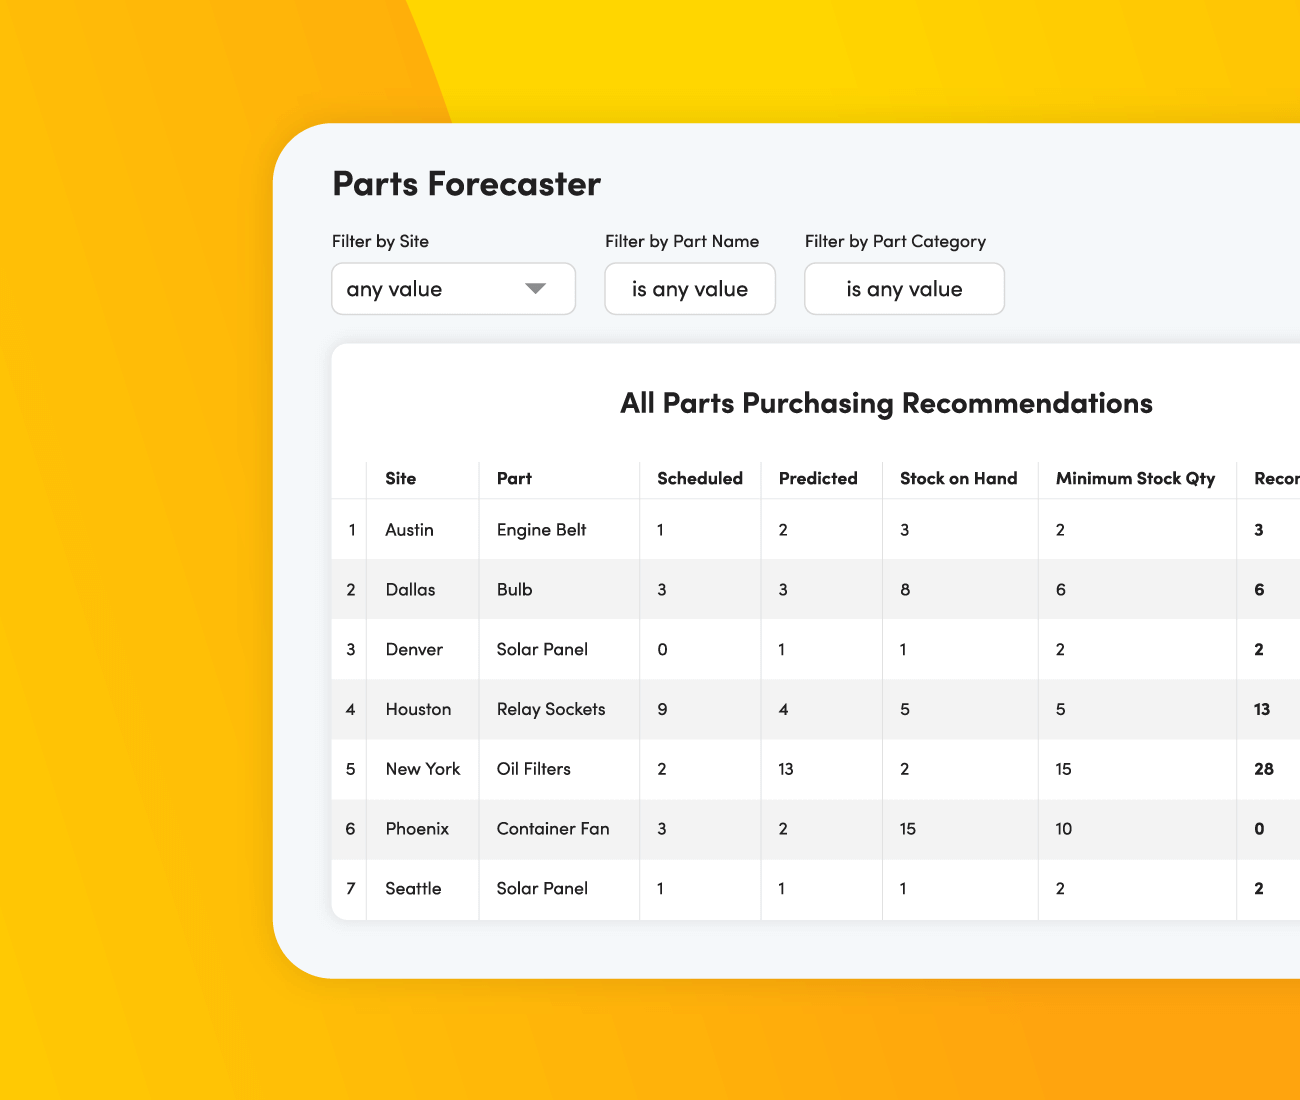 Parts Forecaster